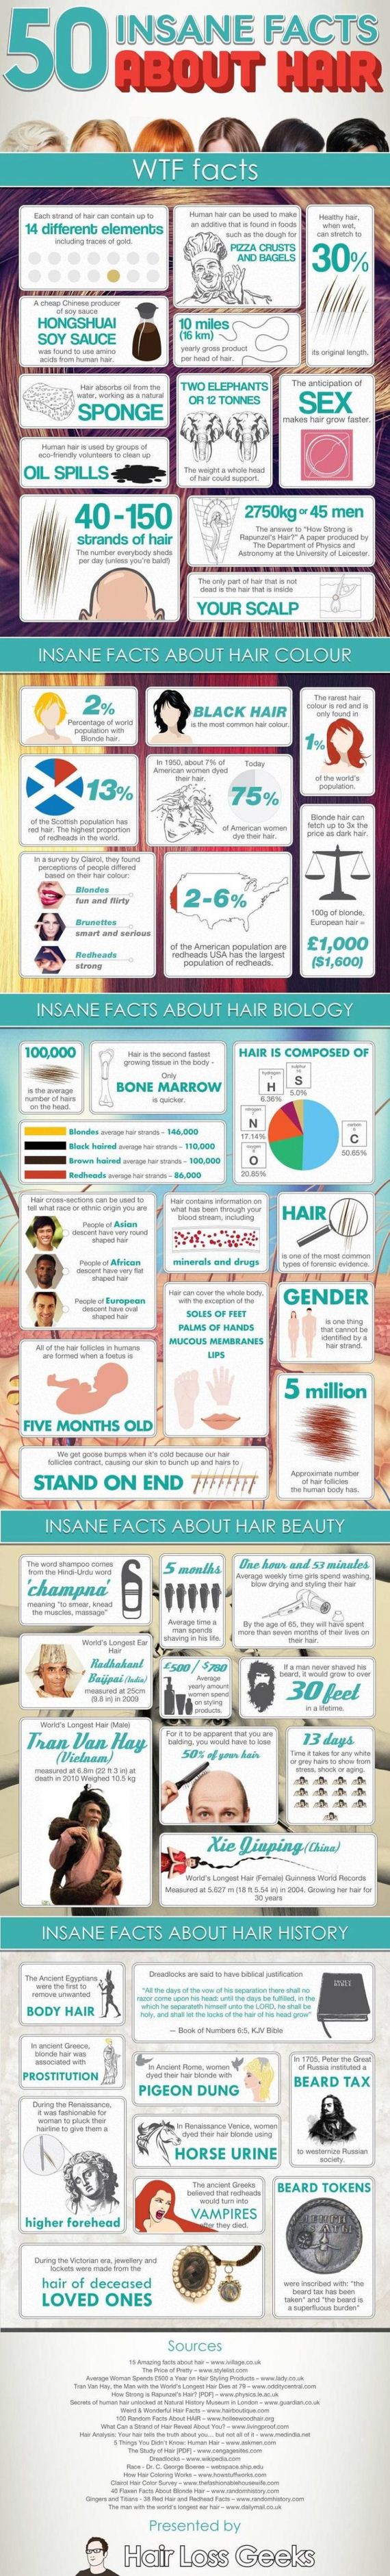 facts_about_hair